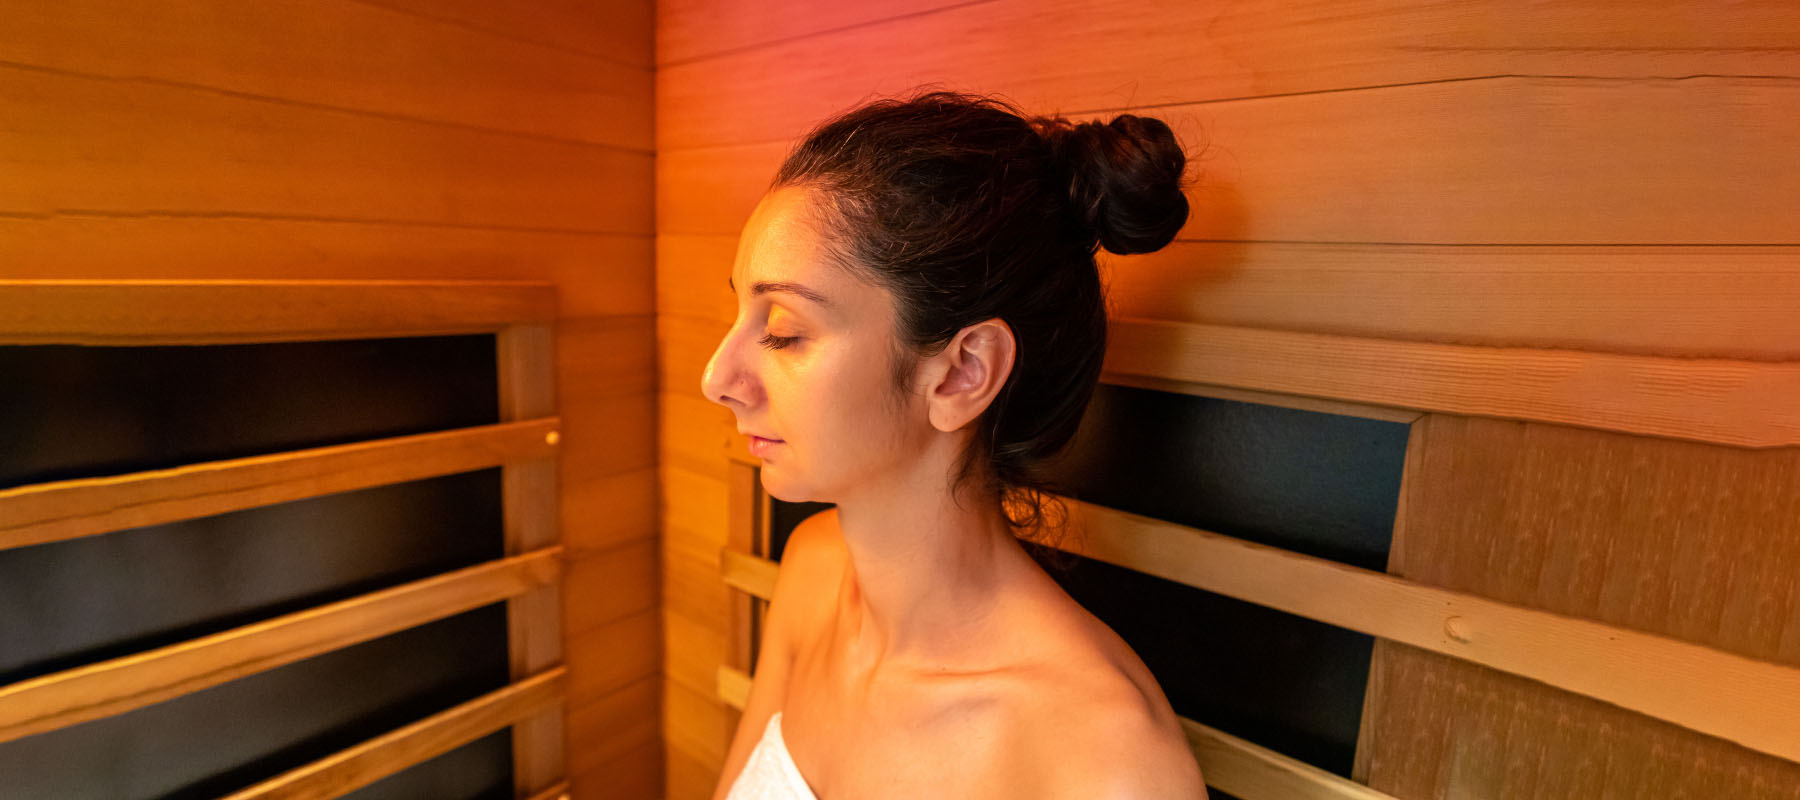 far infrared sauna benefits for a good new year cleanout!